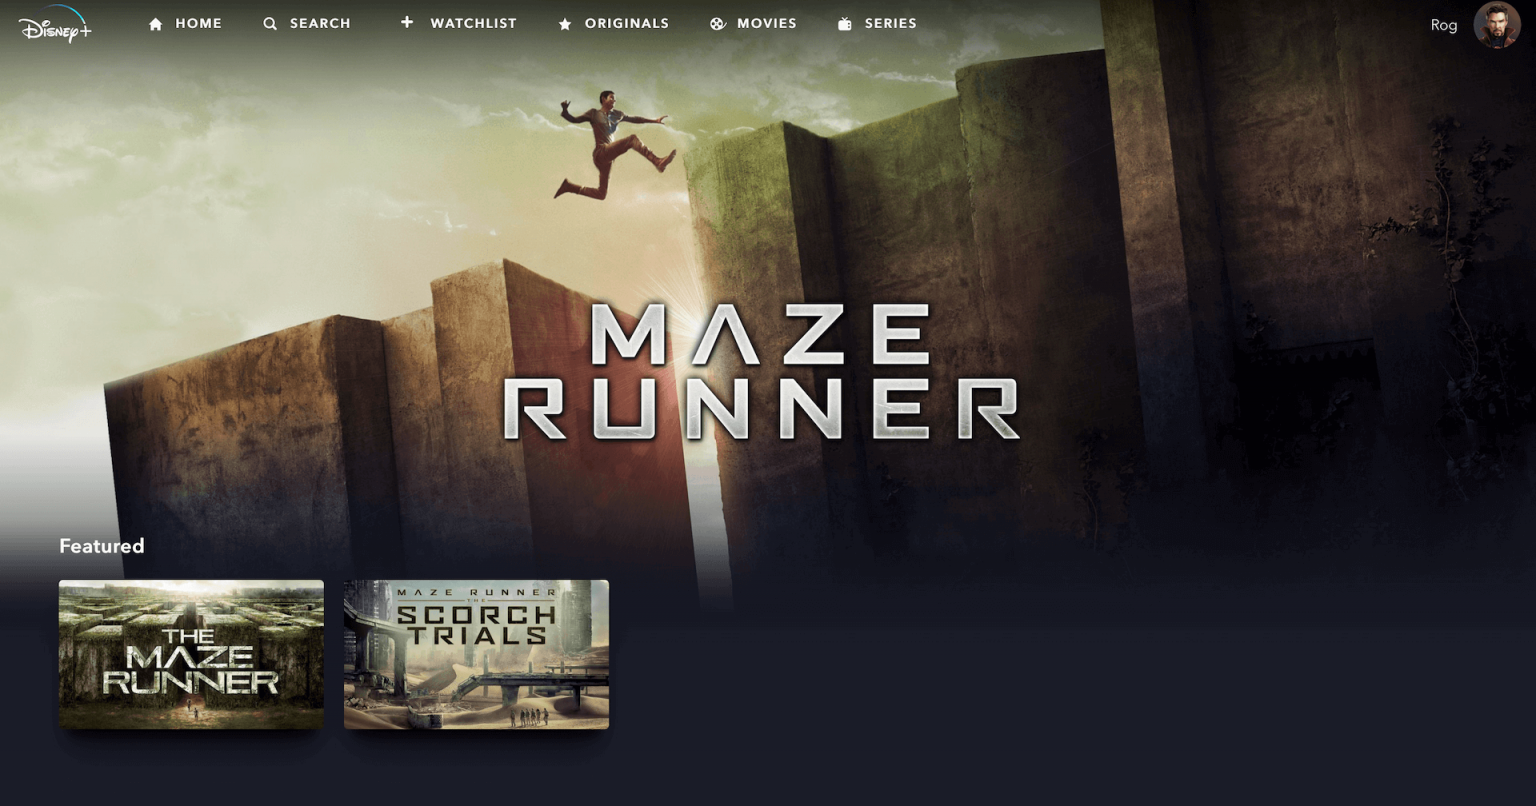 Disney+ Adds New “The Maze Runner” Collection What's On Disney Plus